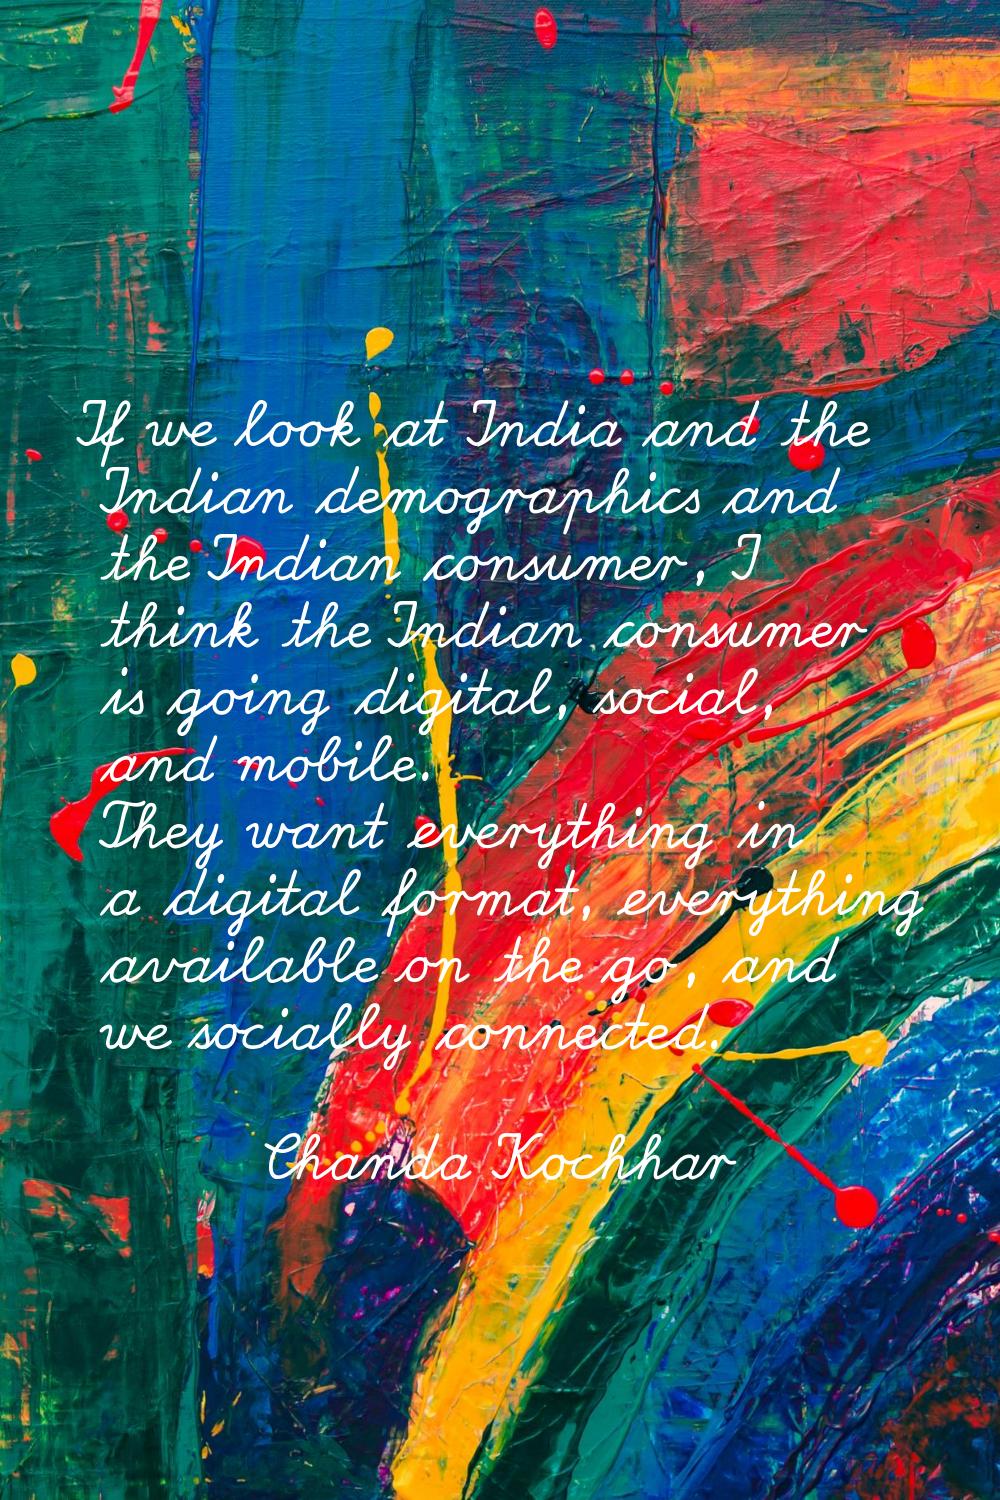 If we look at India and the Indian demographics and the Indian consumer, I think the Indian consume